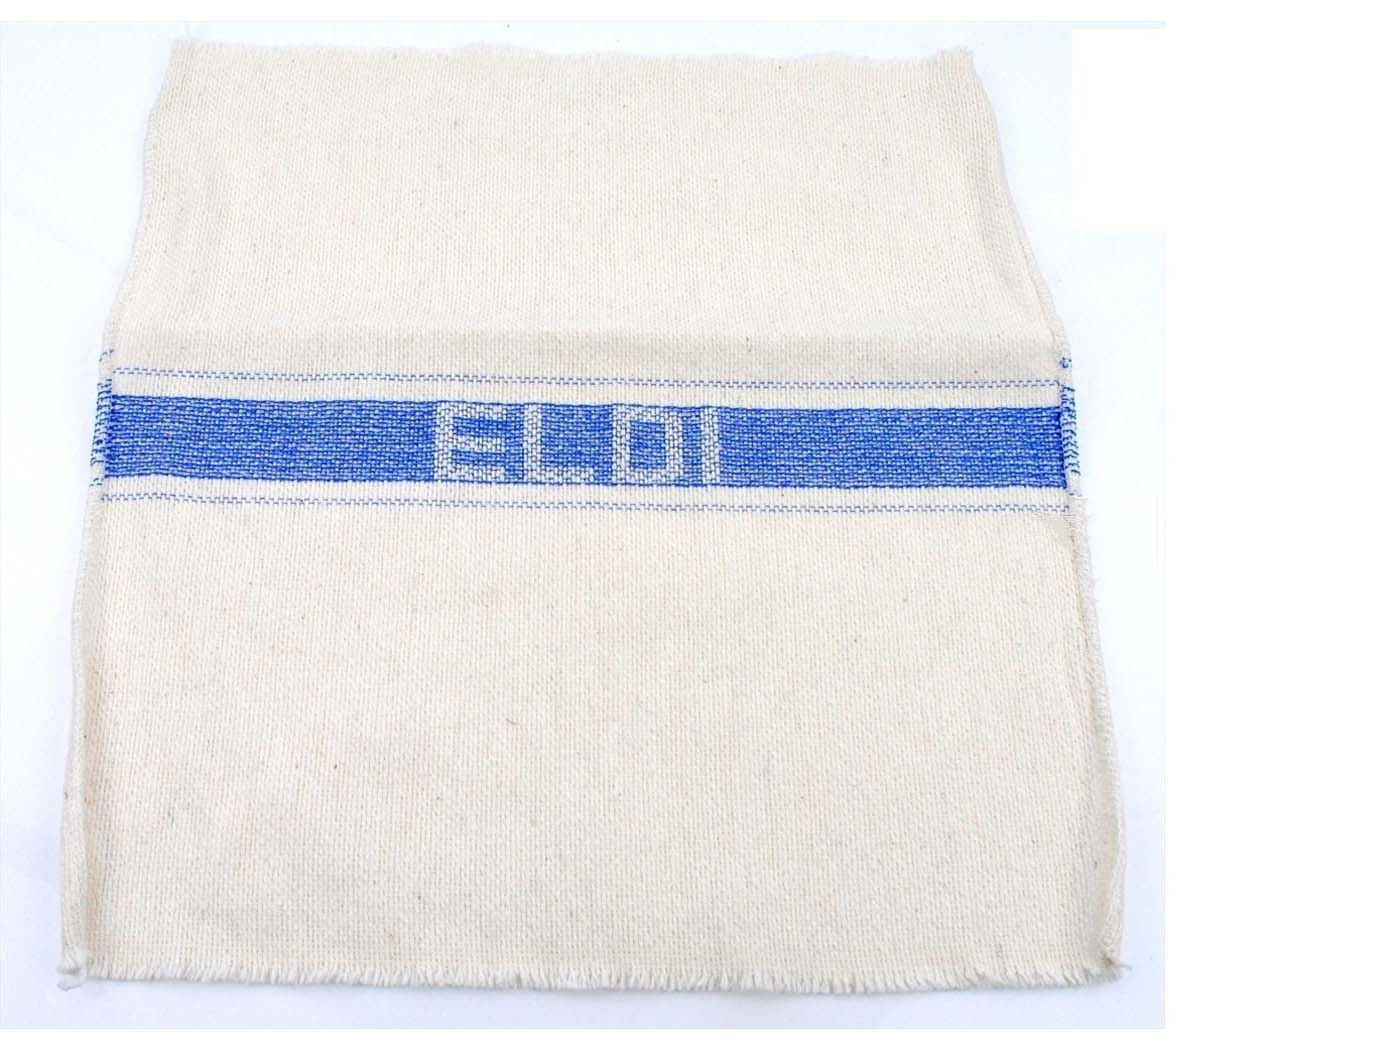 Cleaning Cloth Moped ELDI Dimensions 40 X 40cm For Moped, Zündapp, Kreidler, Hercules, Puch, Miele, DKW, Simson, Rixe